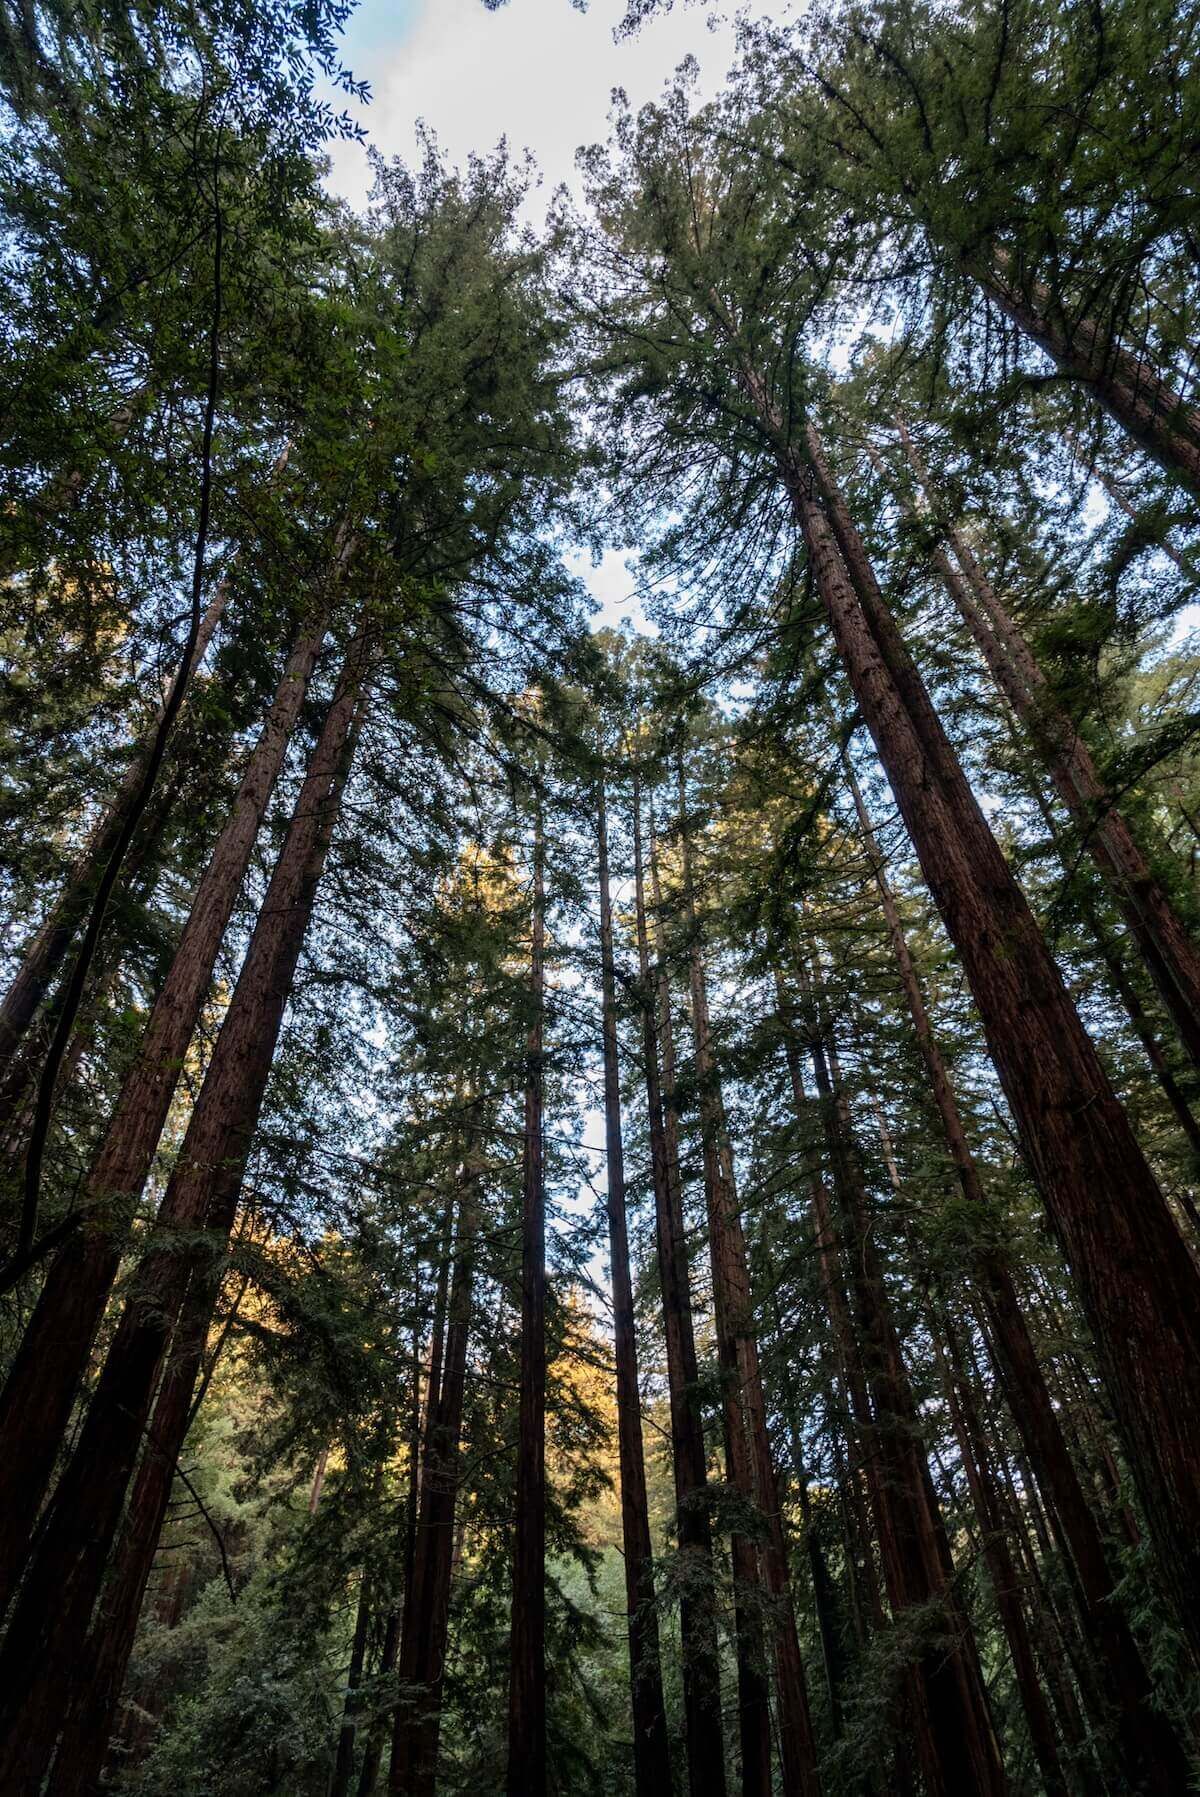 A view looking up at tall, thin redwood trees, with a pale blue sky behind it. at Redwood Regional Park.